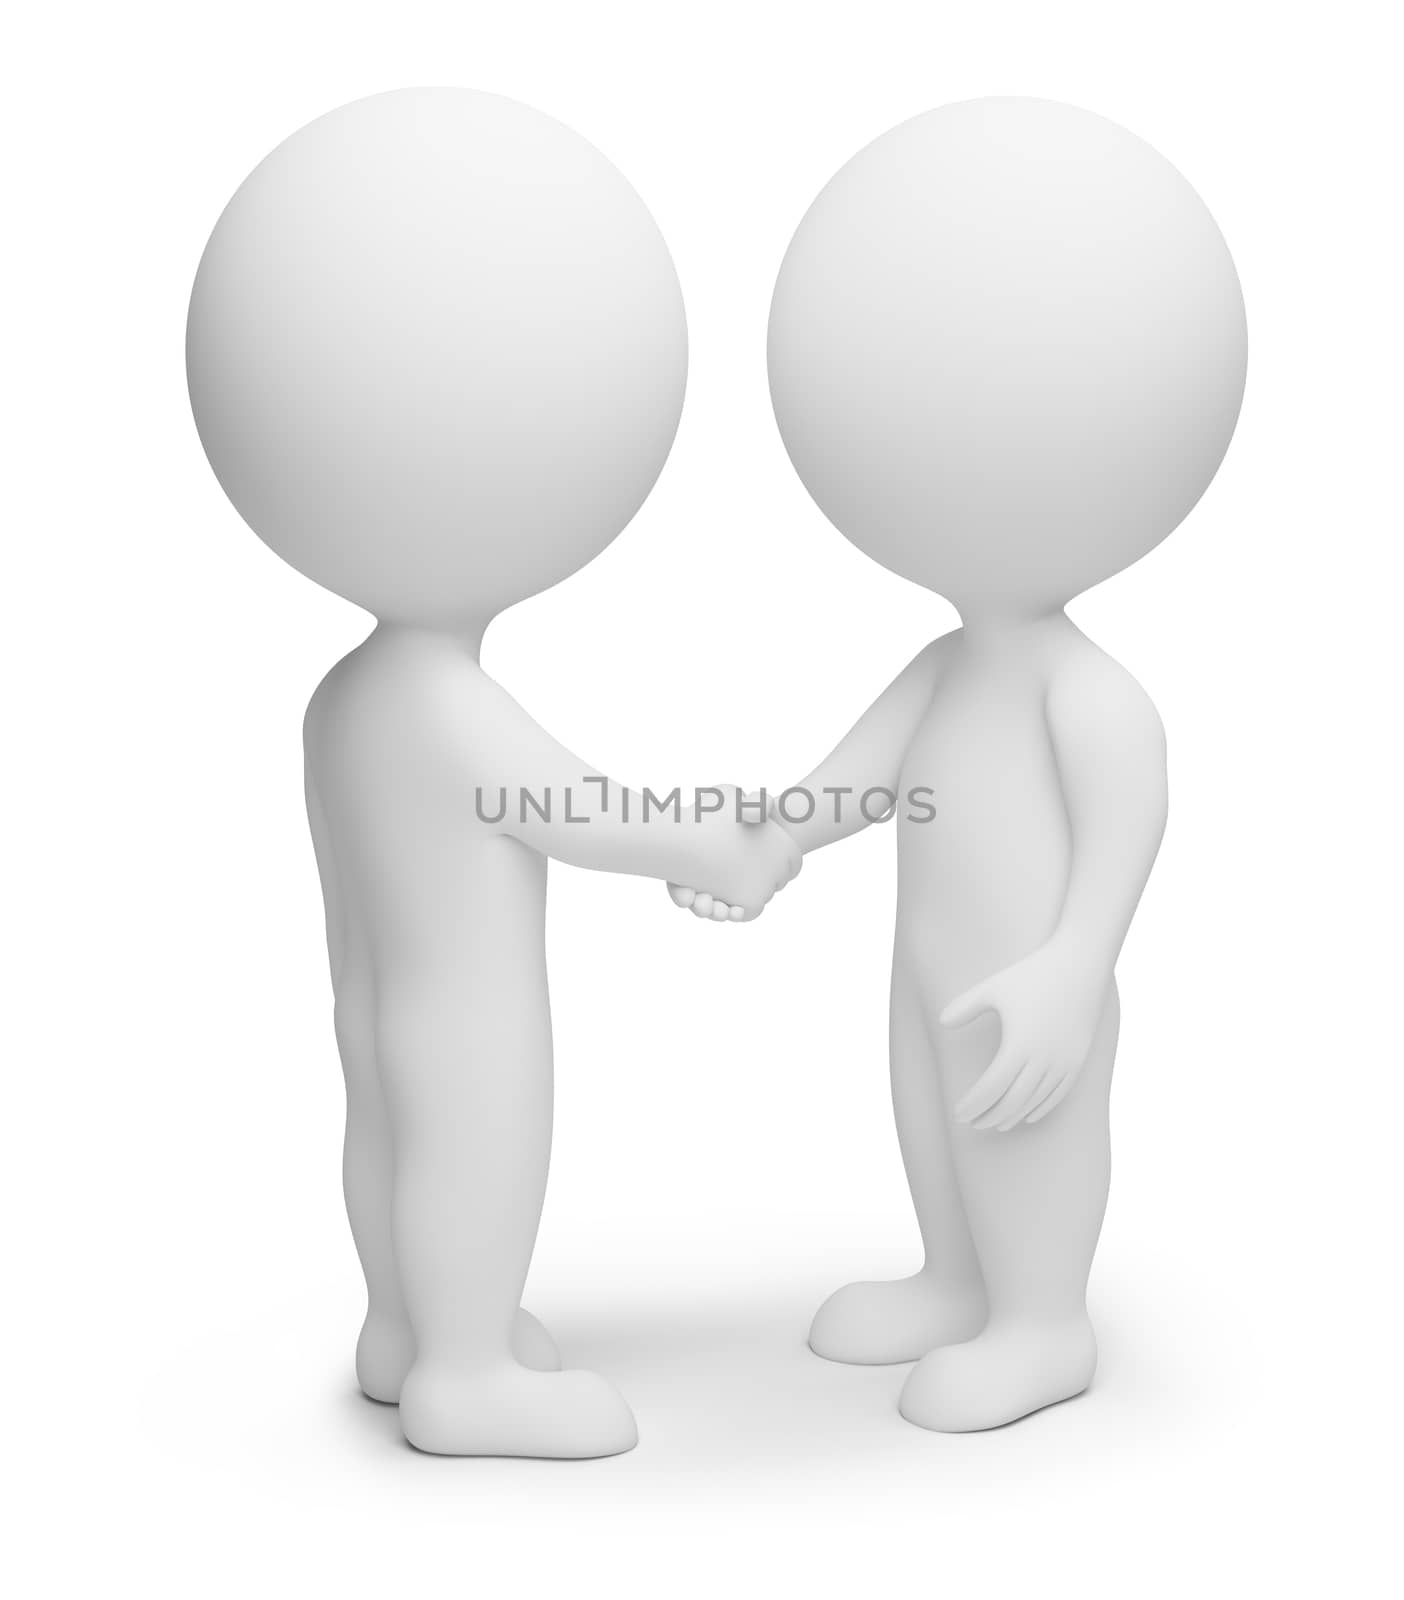 3d small people - friendly hand shake. 3d image. Isolated white background.